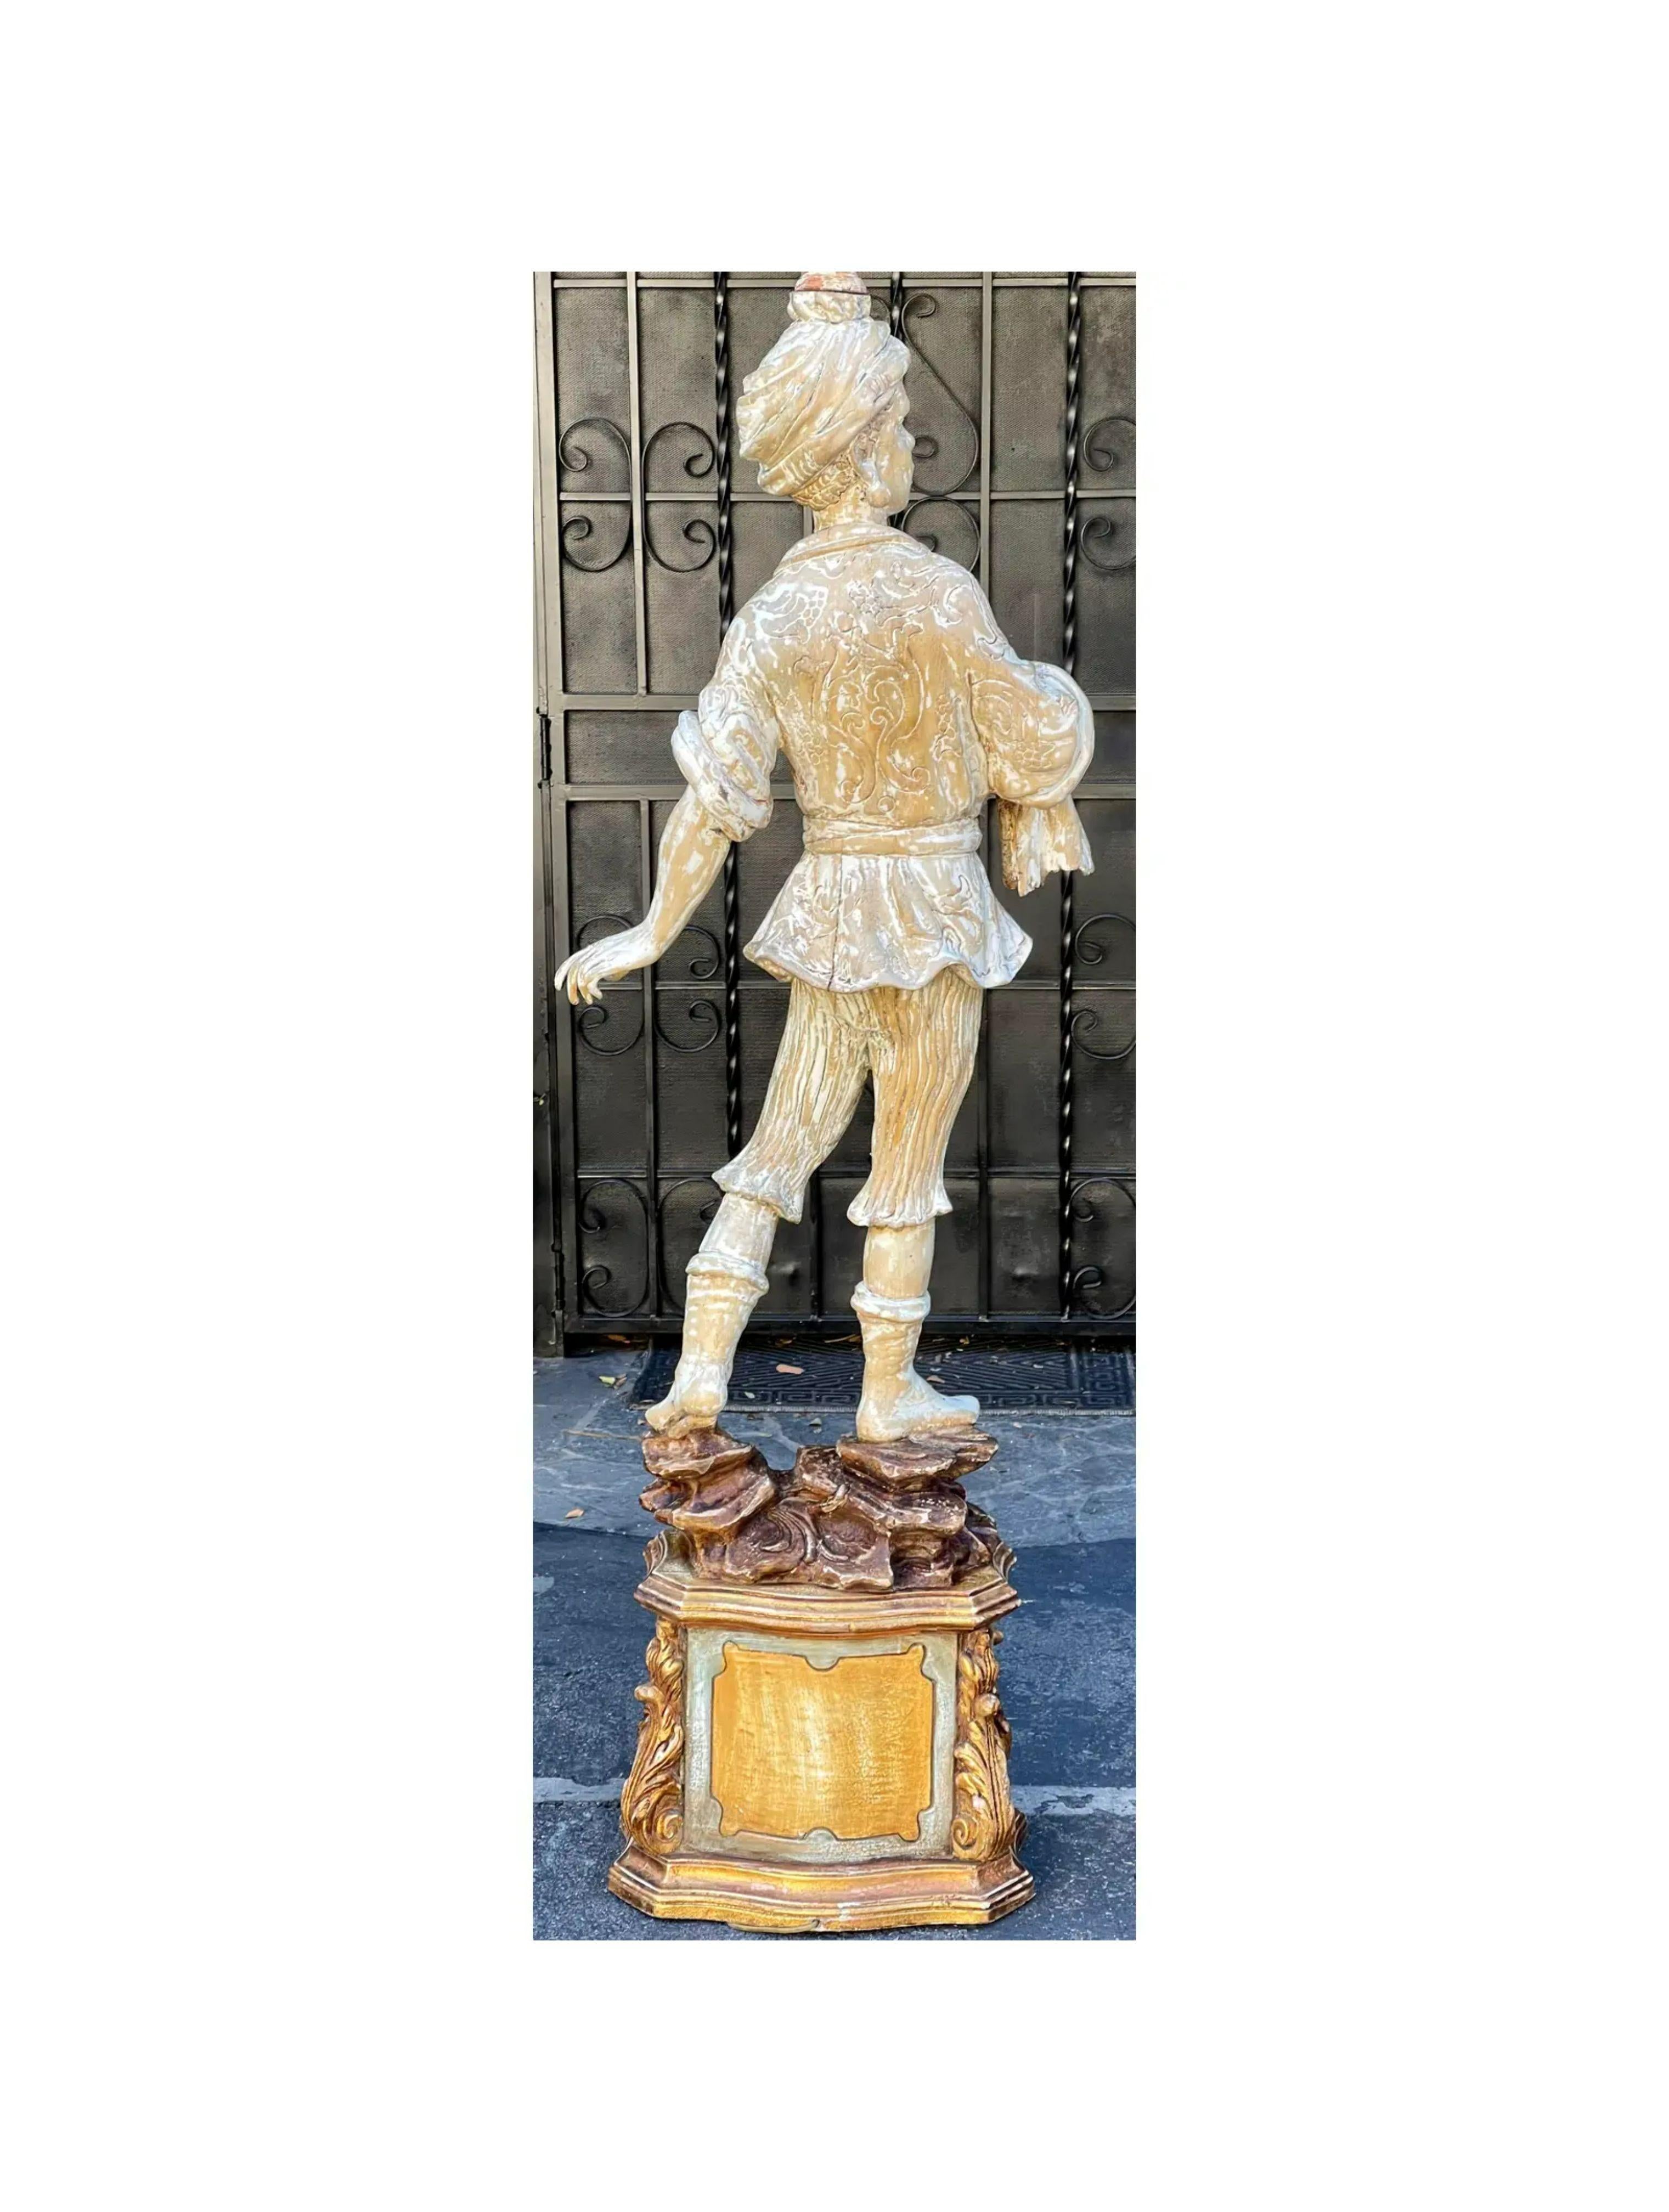 Antique Italian Figural Standing Candelabra Floor Lamp, Early 20th Century For Sale 2